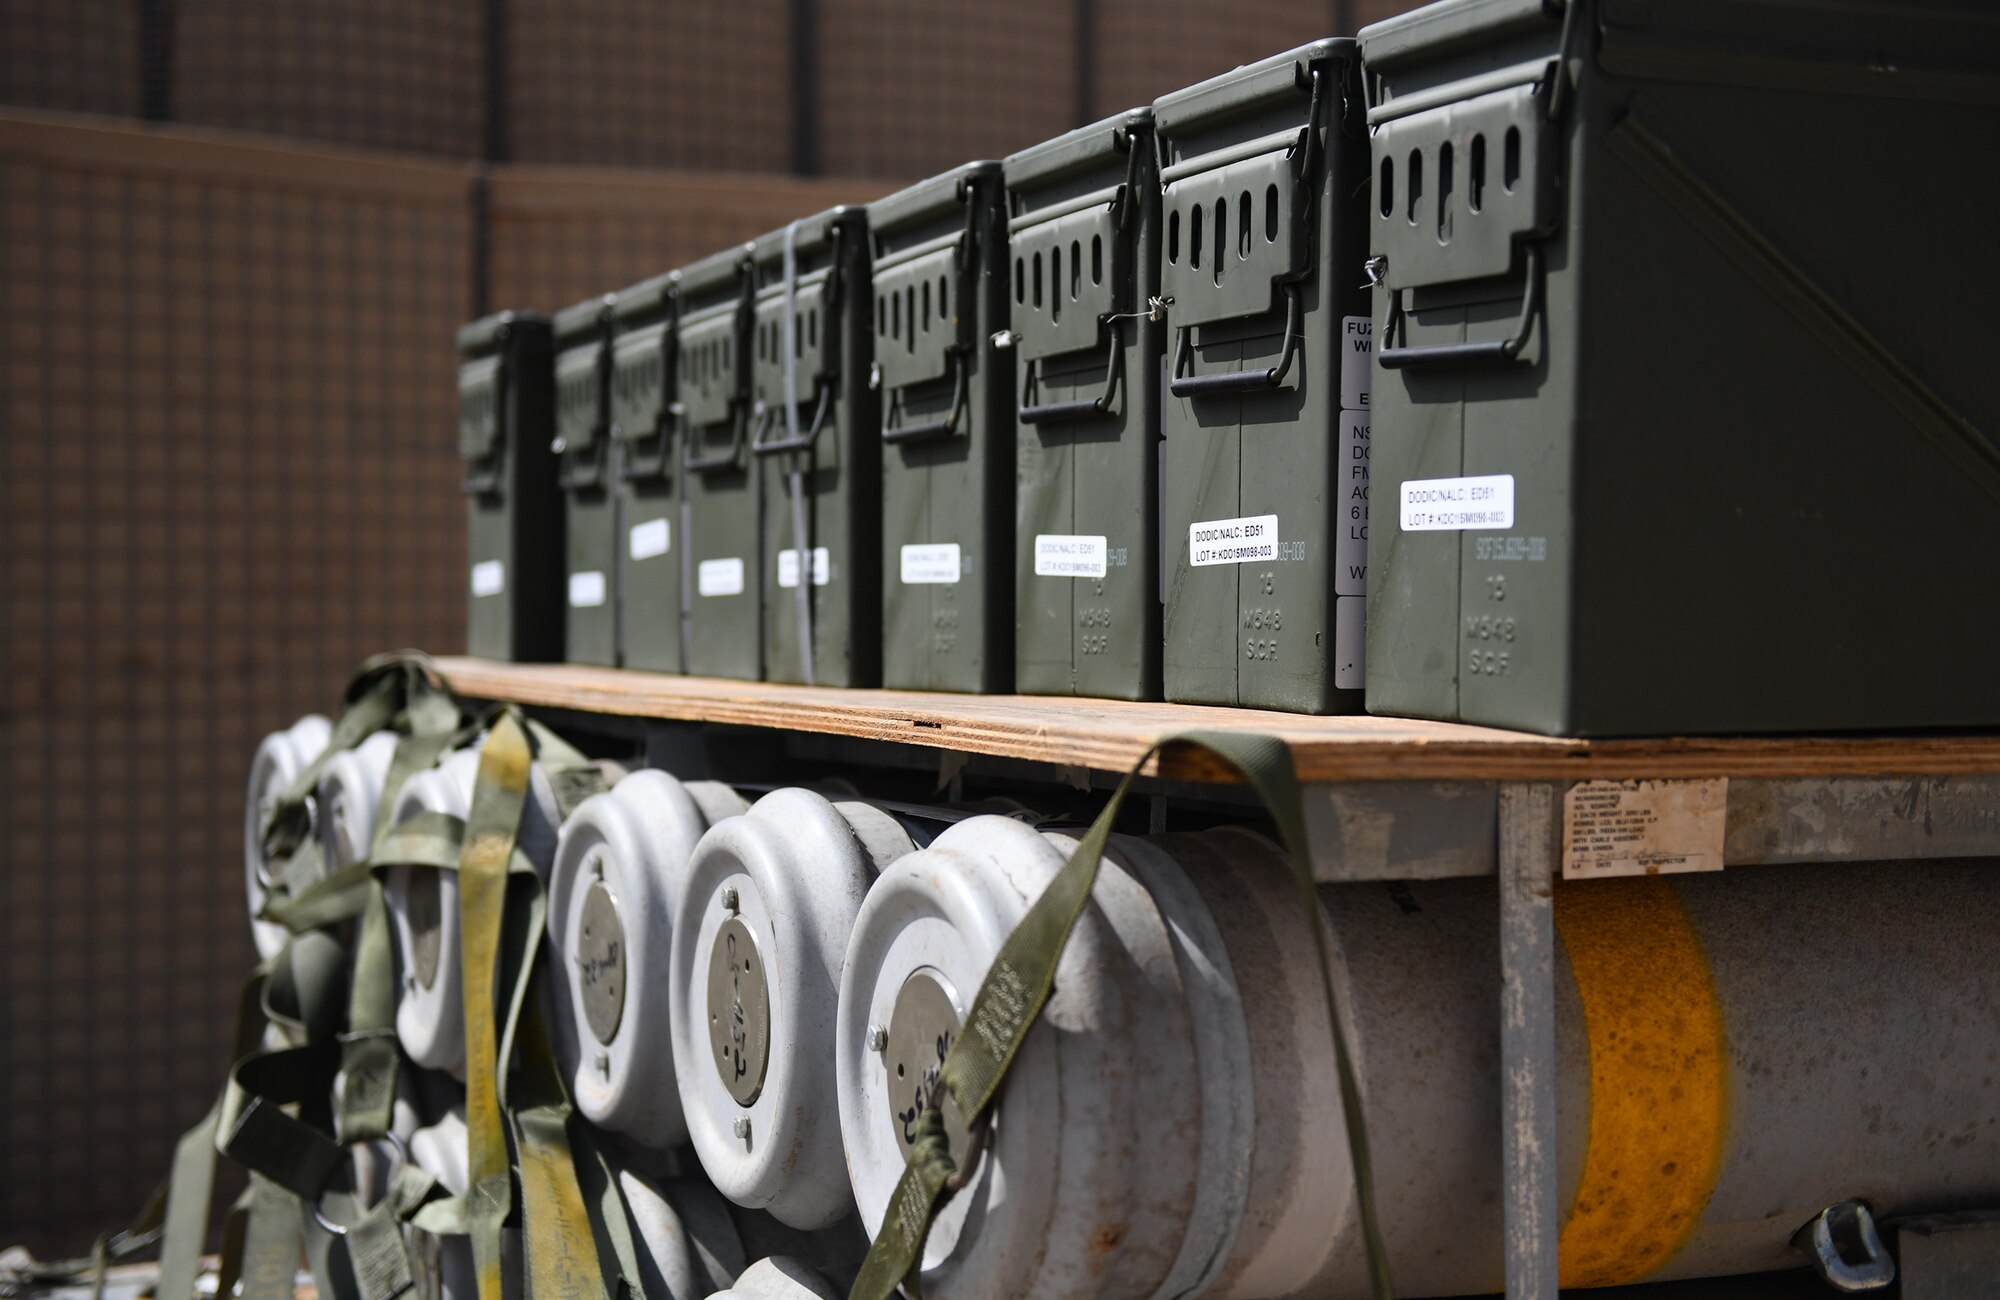 Munitions are ready to be assembled at Chabelley Airfield, Djibouti, Nov. 12, 2019. The 726th Expeditionary Air Base Squadron Munitions Systems Airmen build, inspect and store all munitions at the airfield, ensuring mission effectiveness at a moment’s notice. (U.S. Air Force photo by Staff Sgt. Alex Fox Echols III)